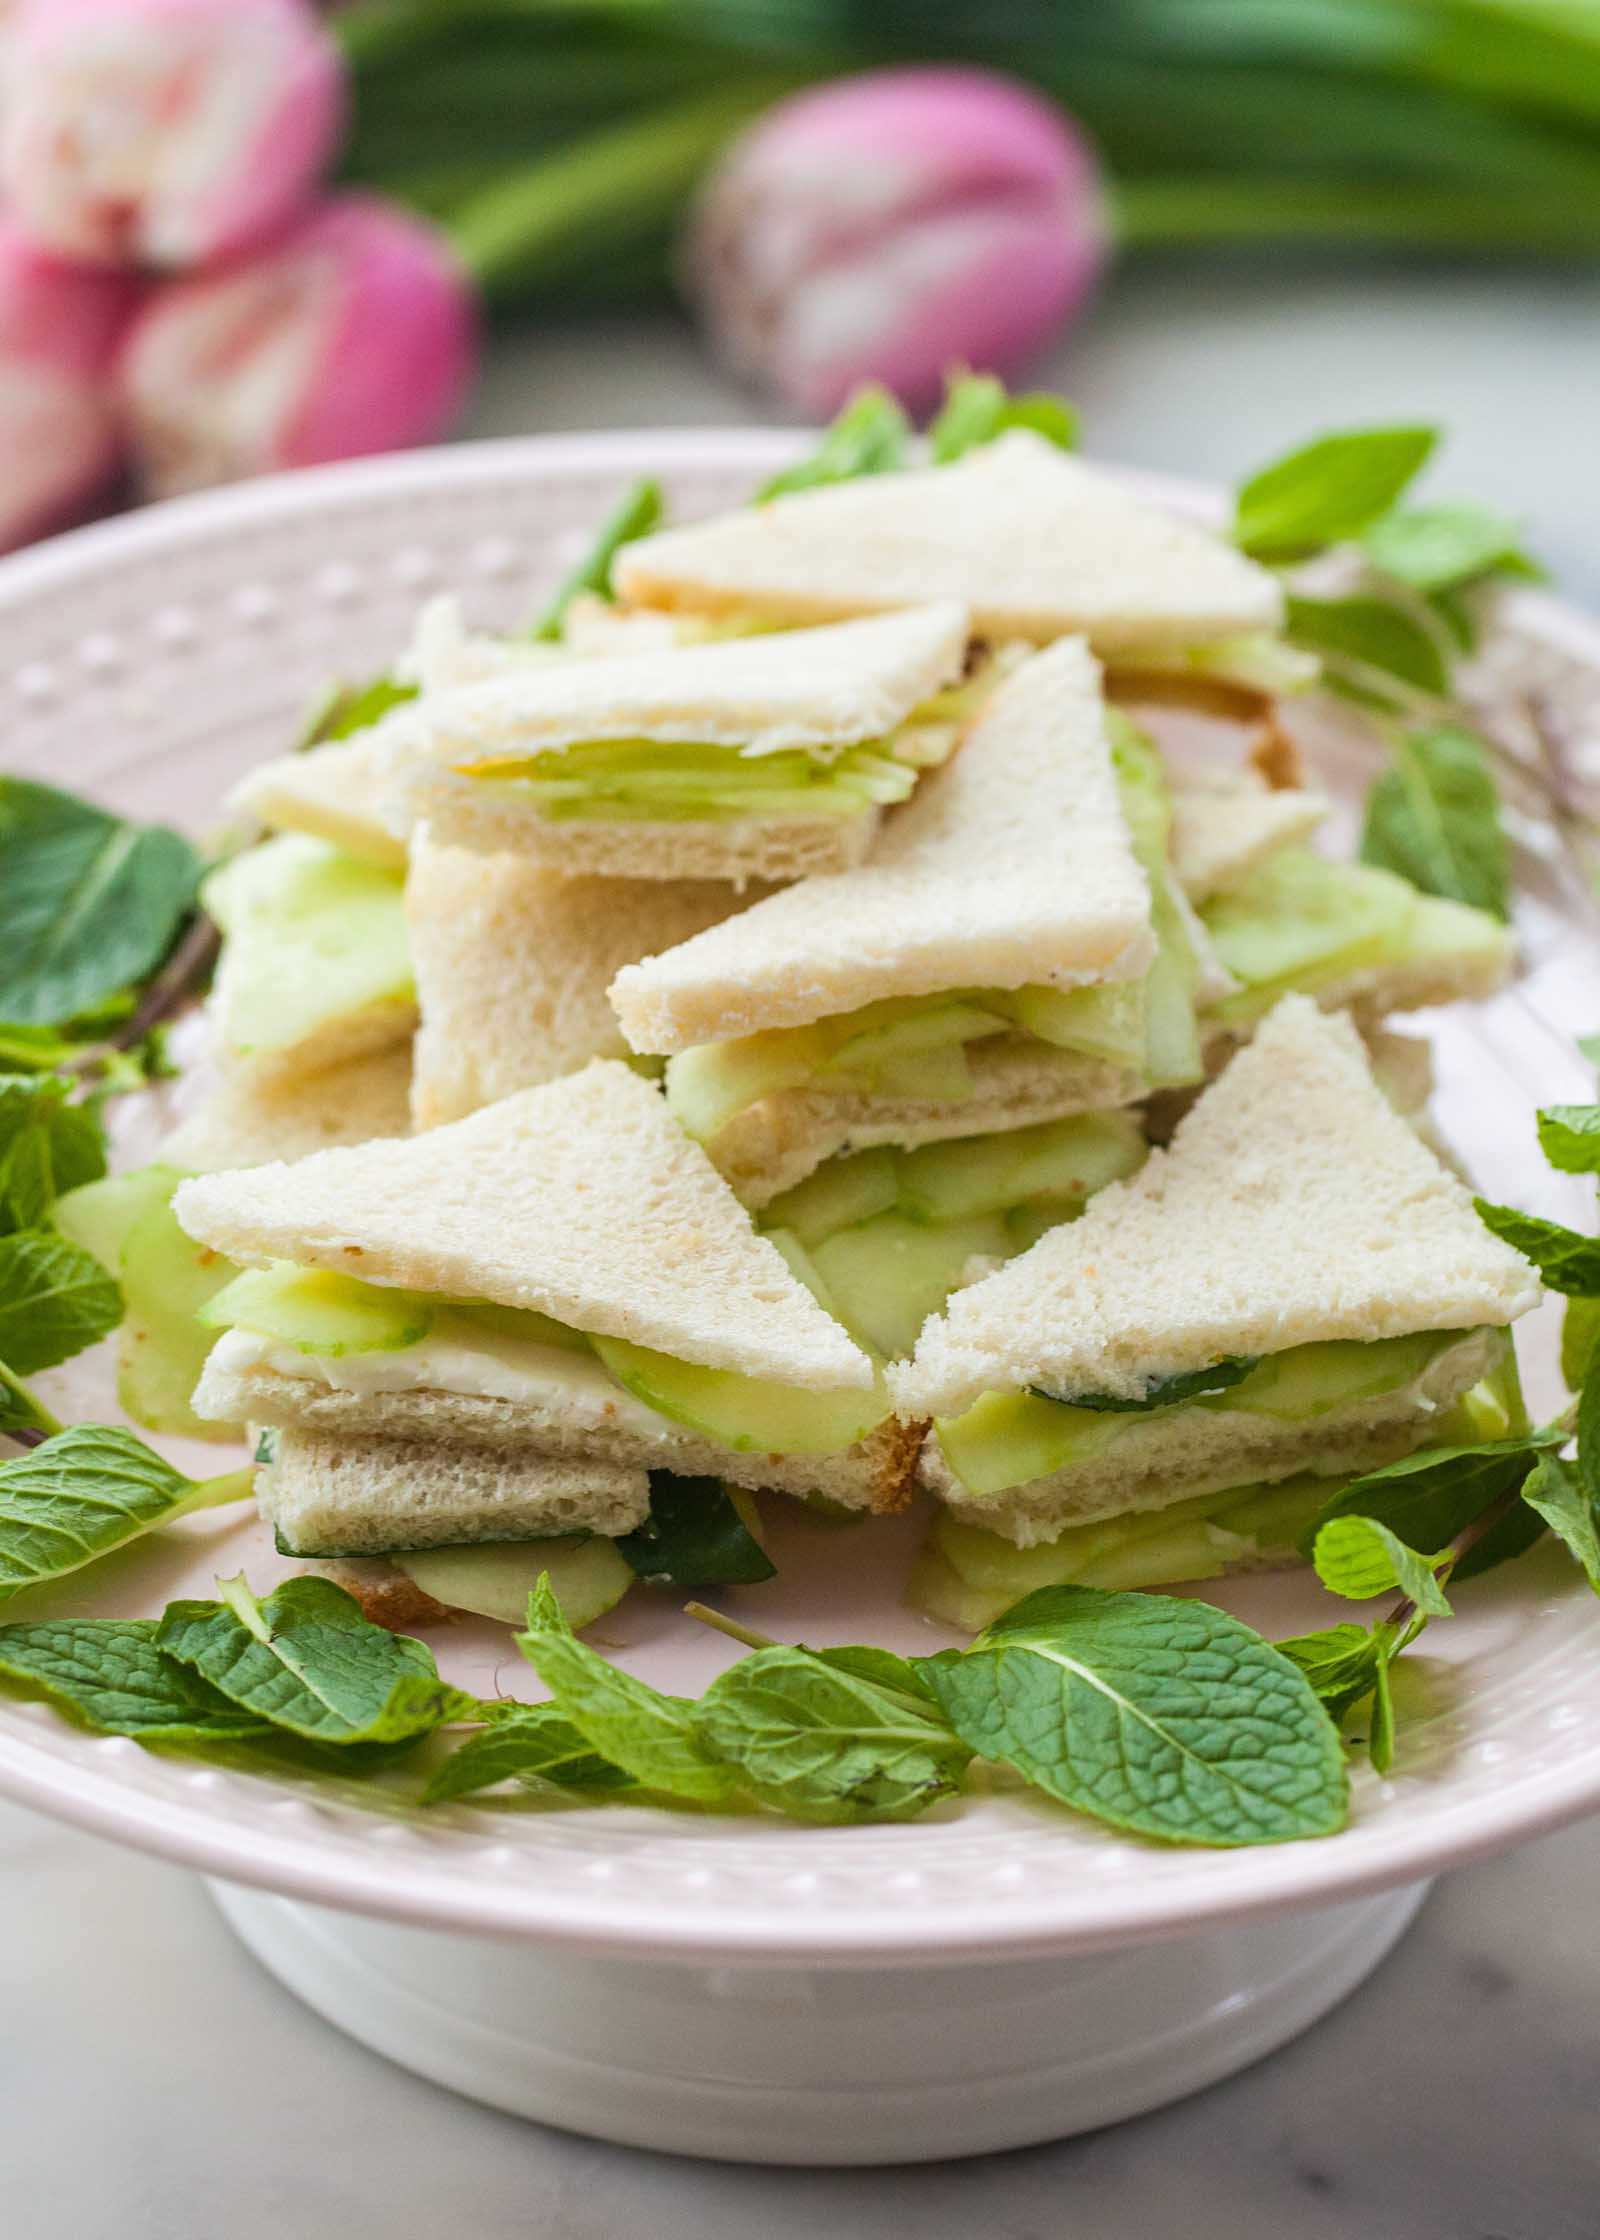 Side view of cucumber finger sandwiches stacked on a cake plate. The sandwiches are cut into triangles and slices of cucumber are visible layered inside each one.